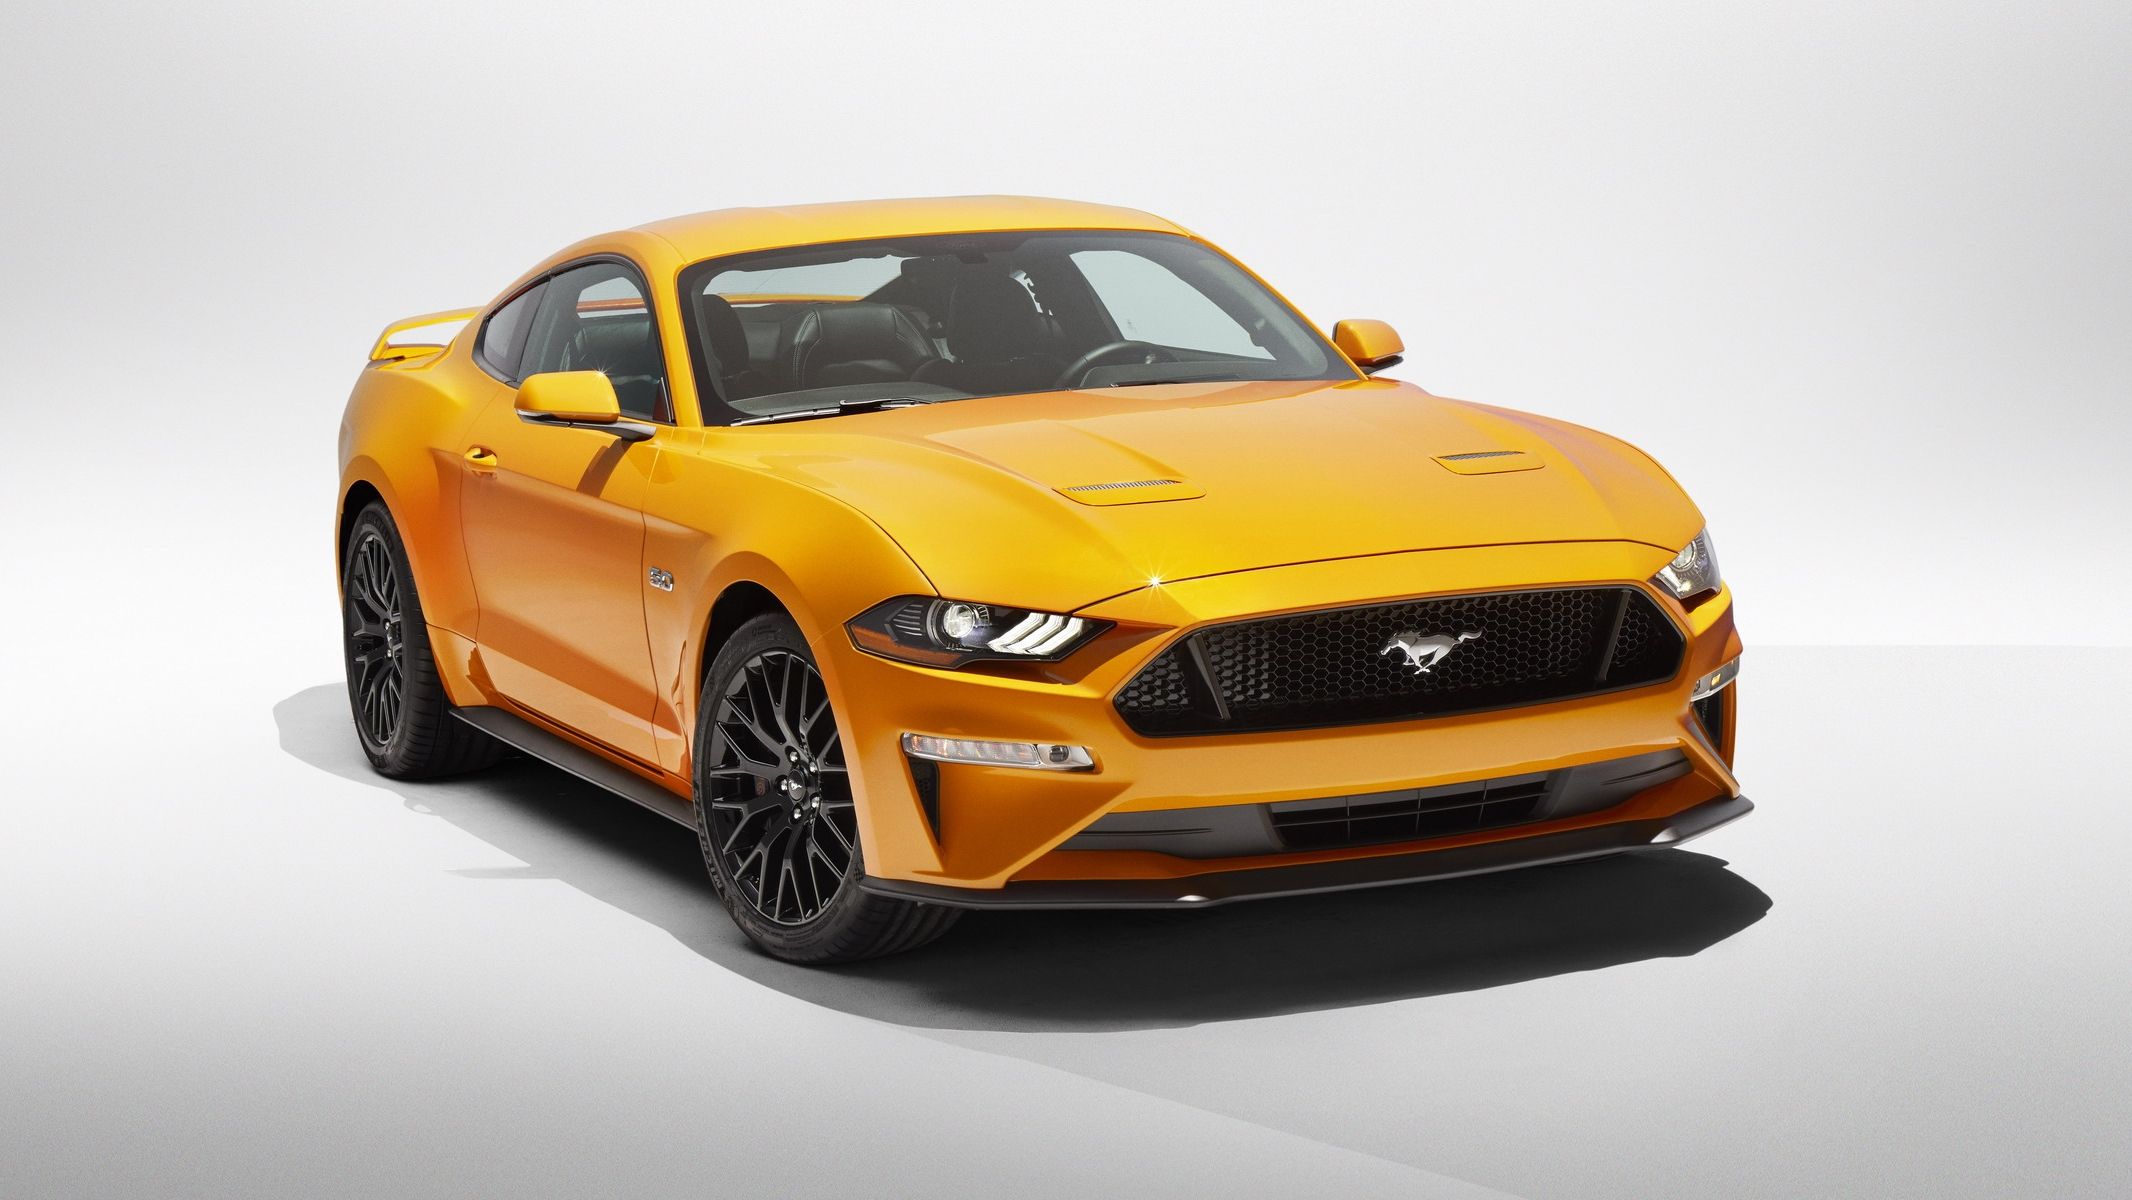 2020 The 2020 Ford Mustang EcoBoost Might be Offered in Two States of Tune